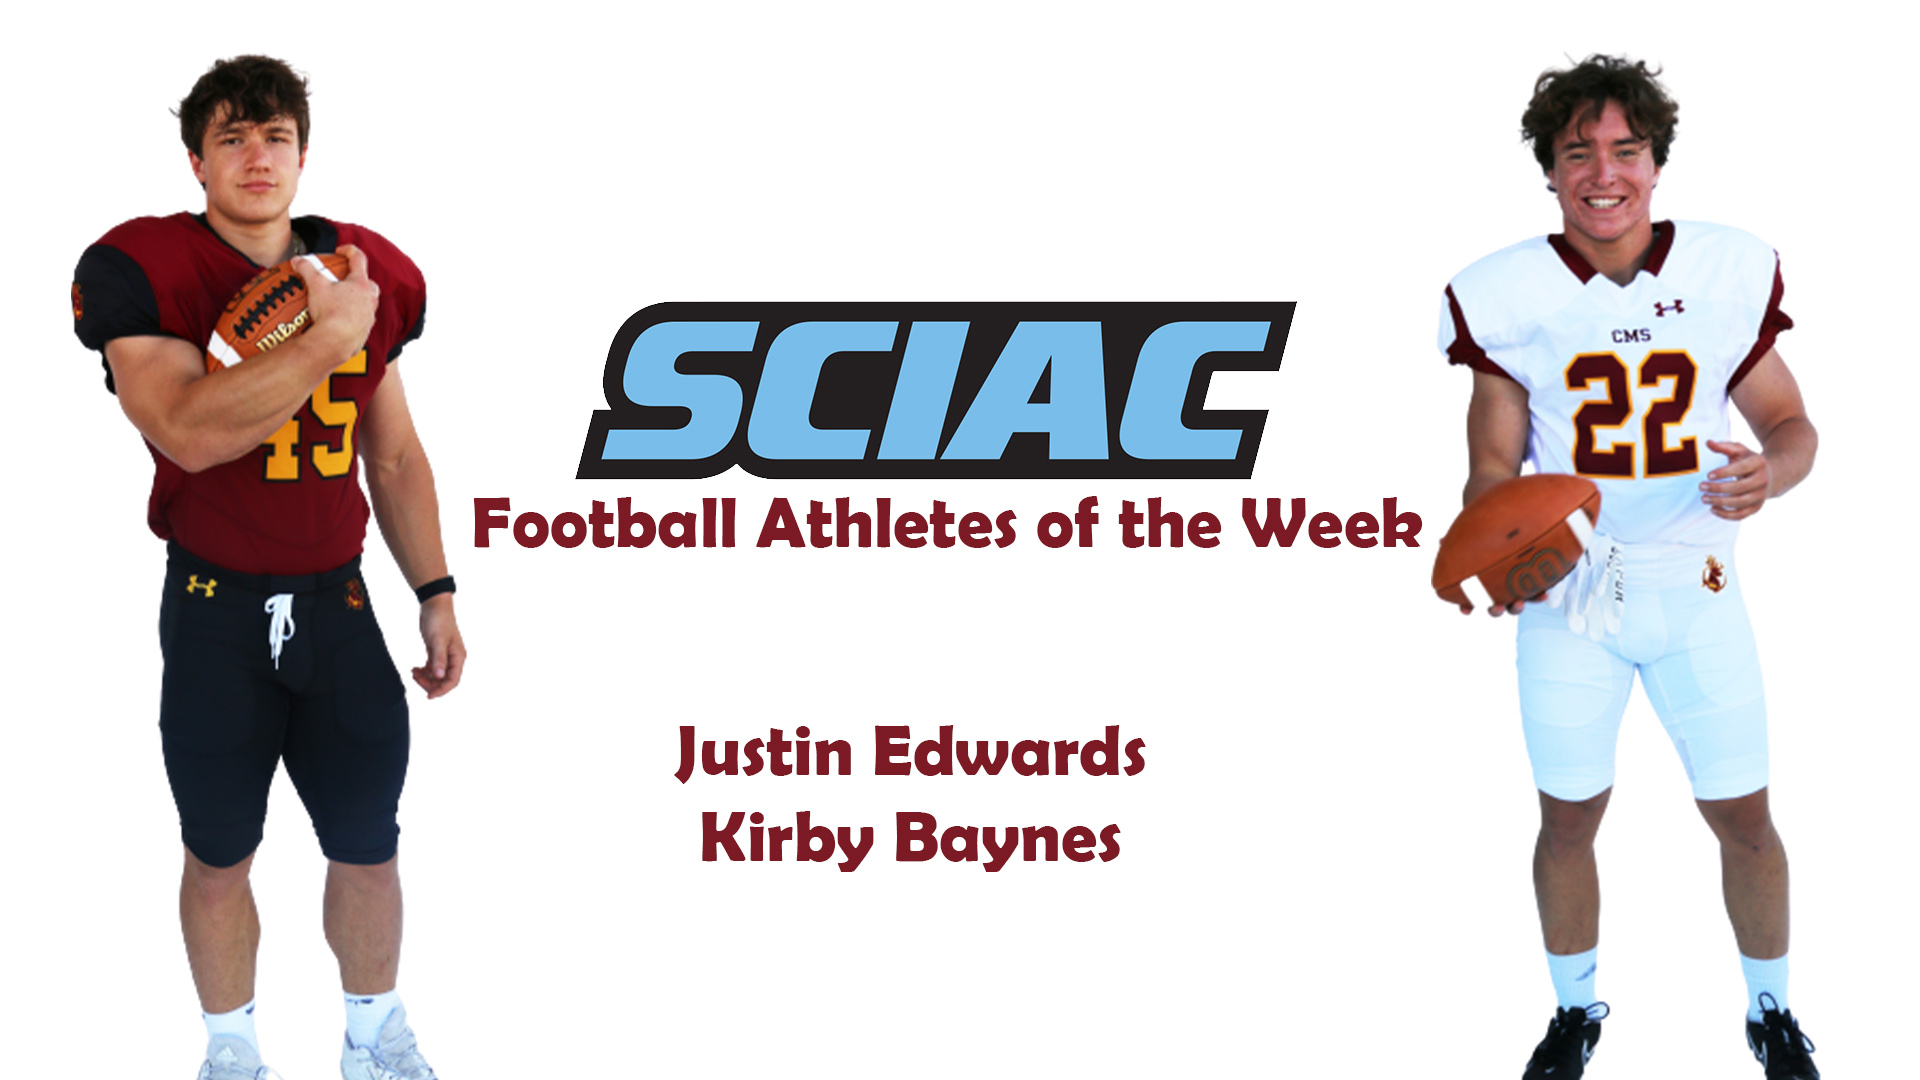 Posed shots of Justin Edwards and Kirby Baynes around the SCIAC logo